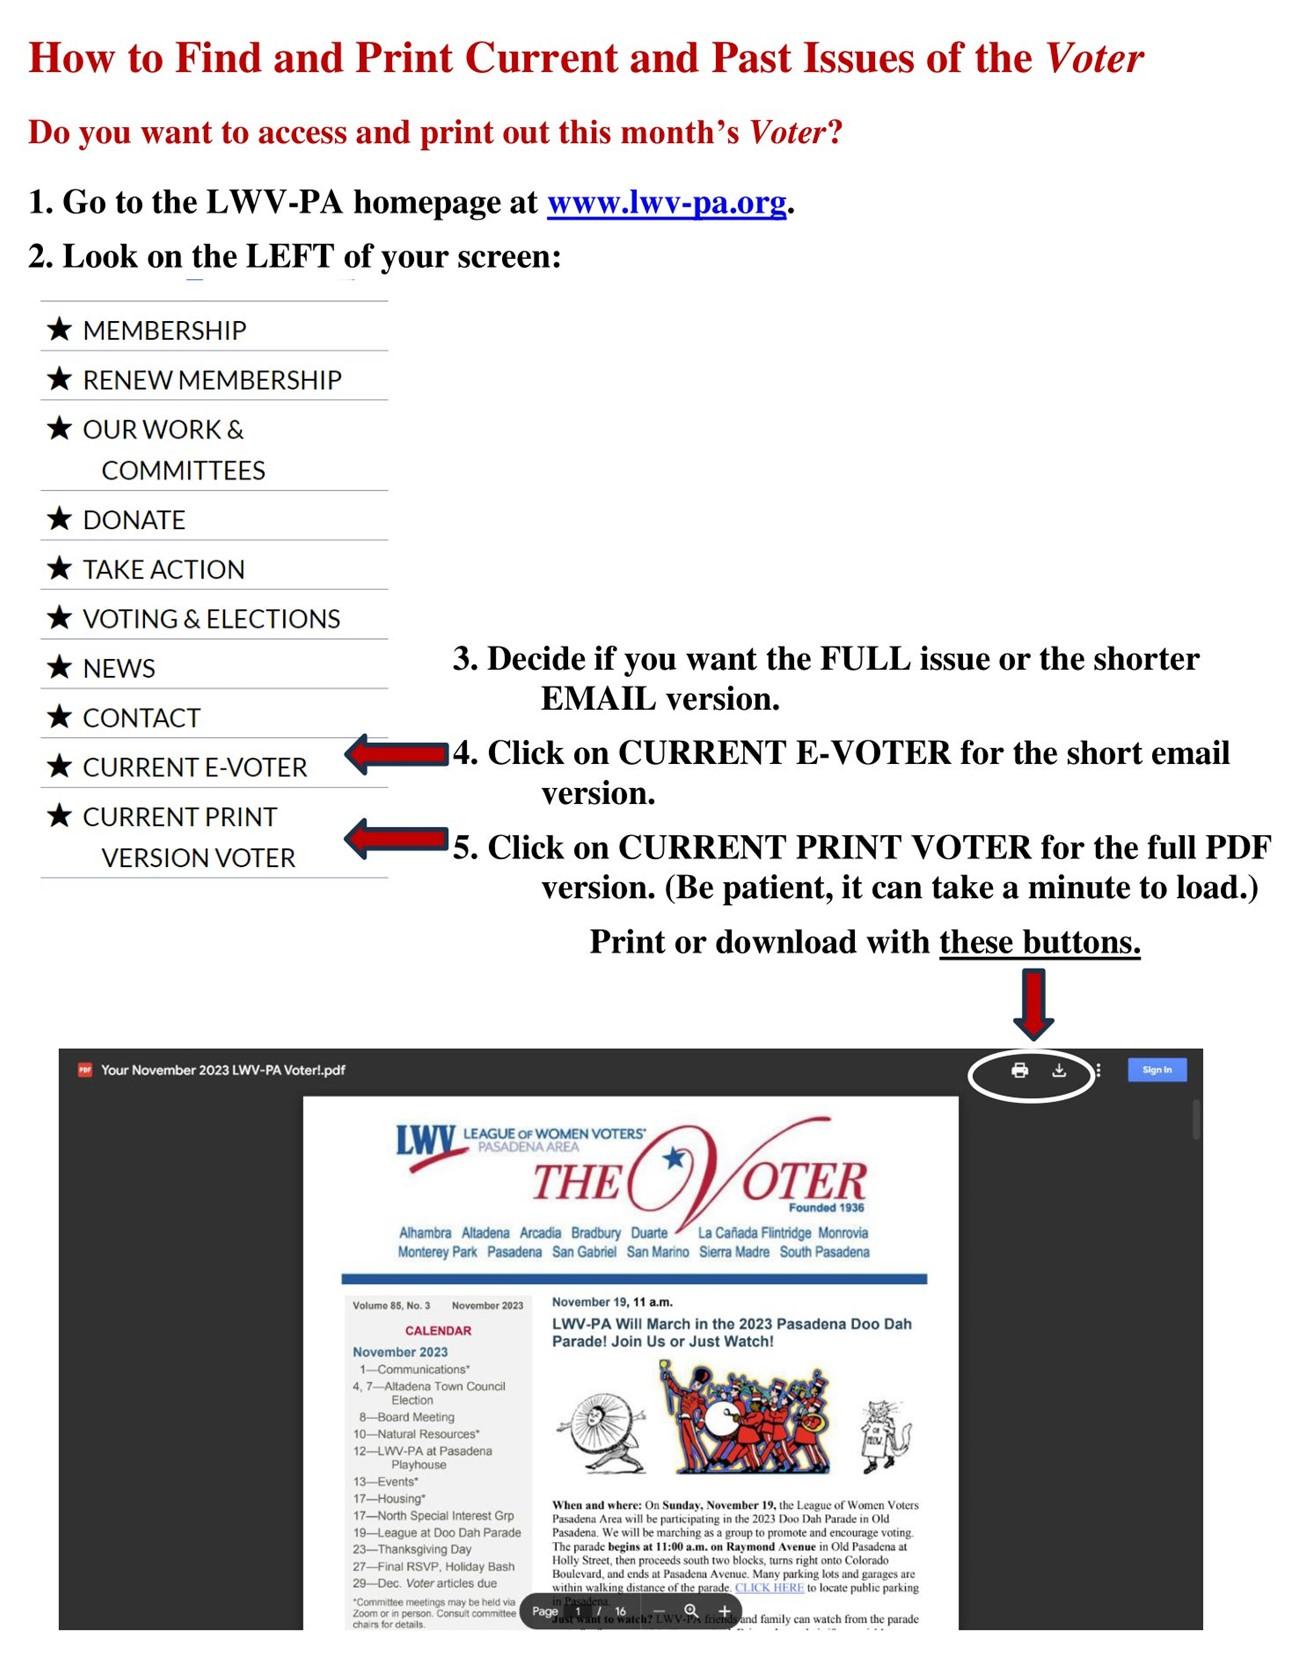 How to print the Voter